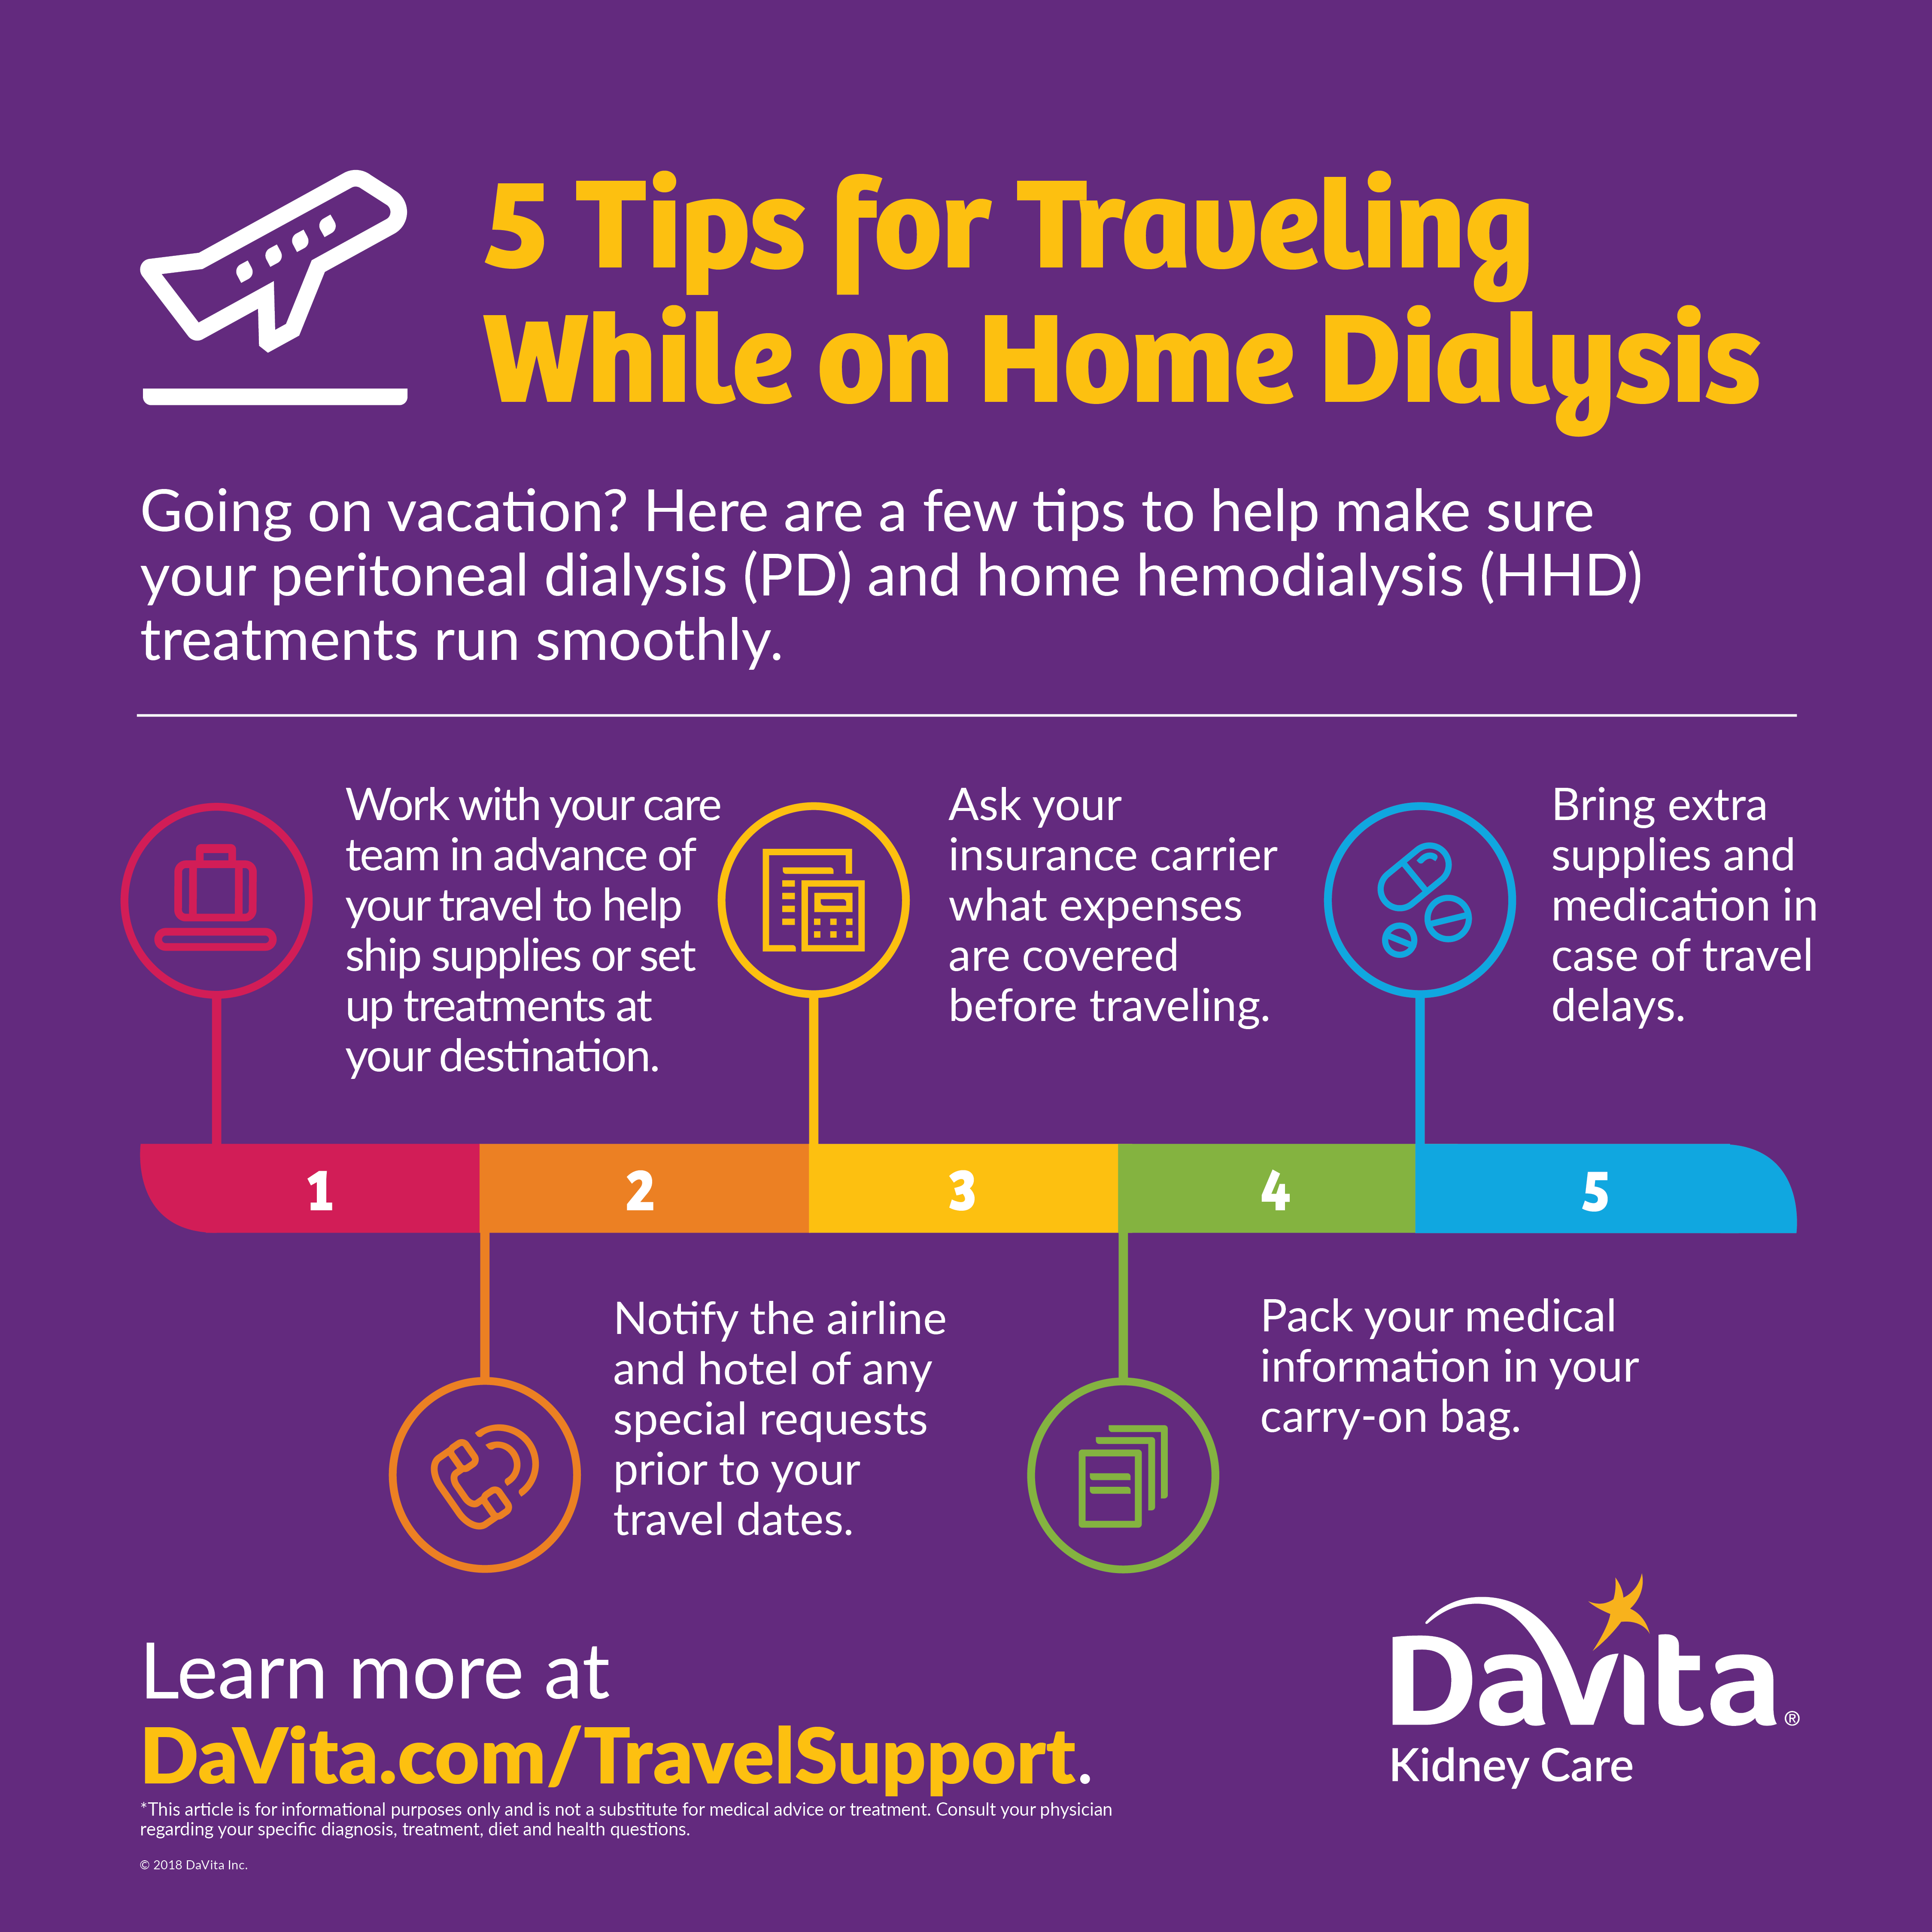 5 Tips for Traveling While on Home Dialysis